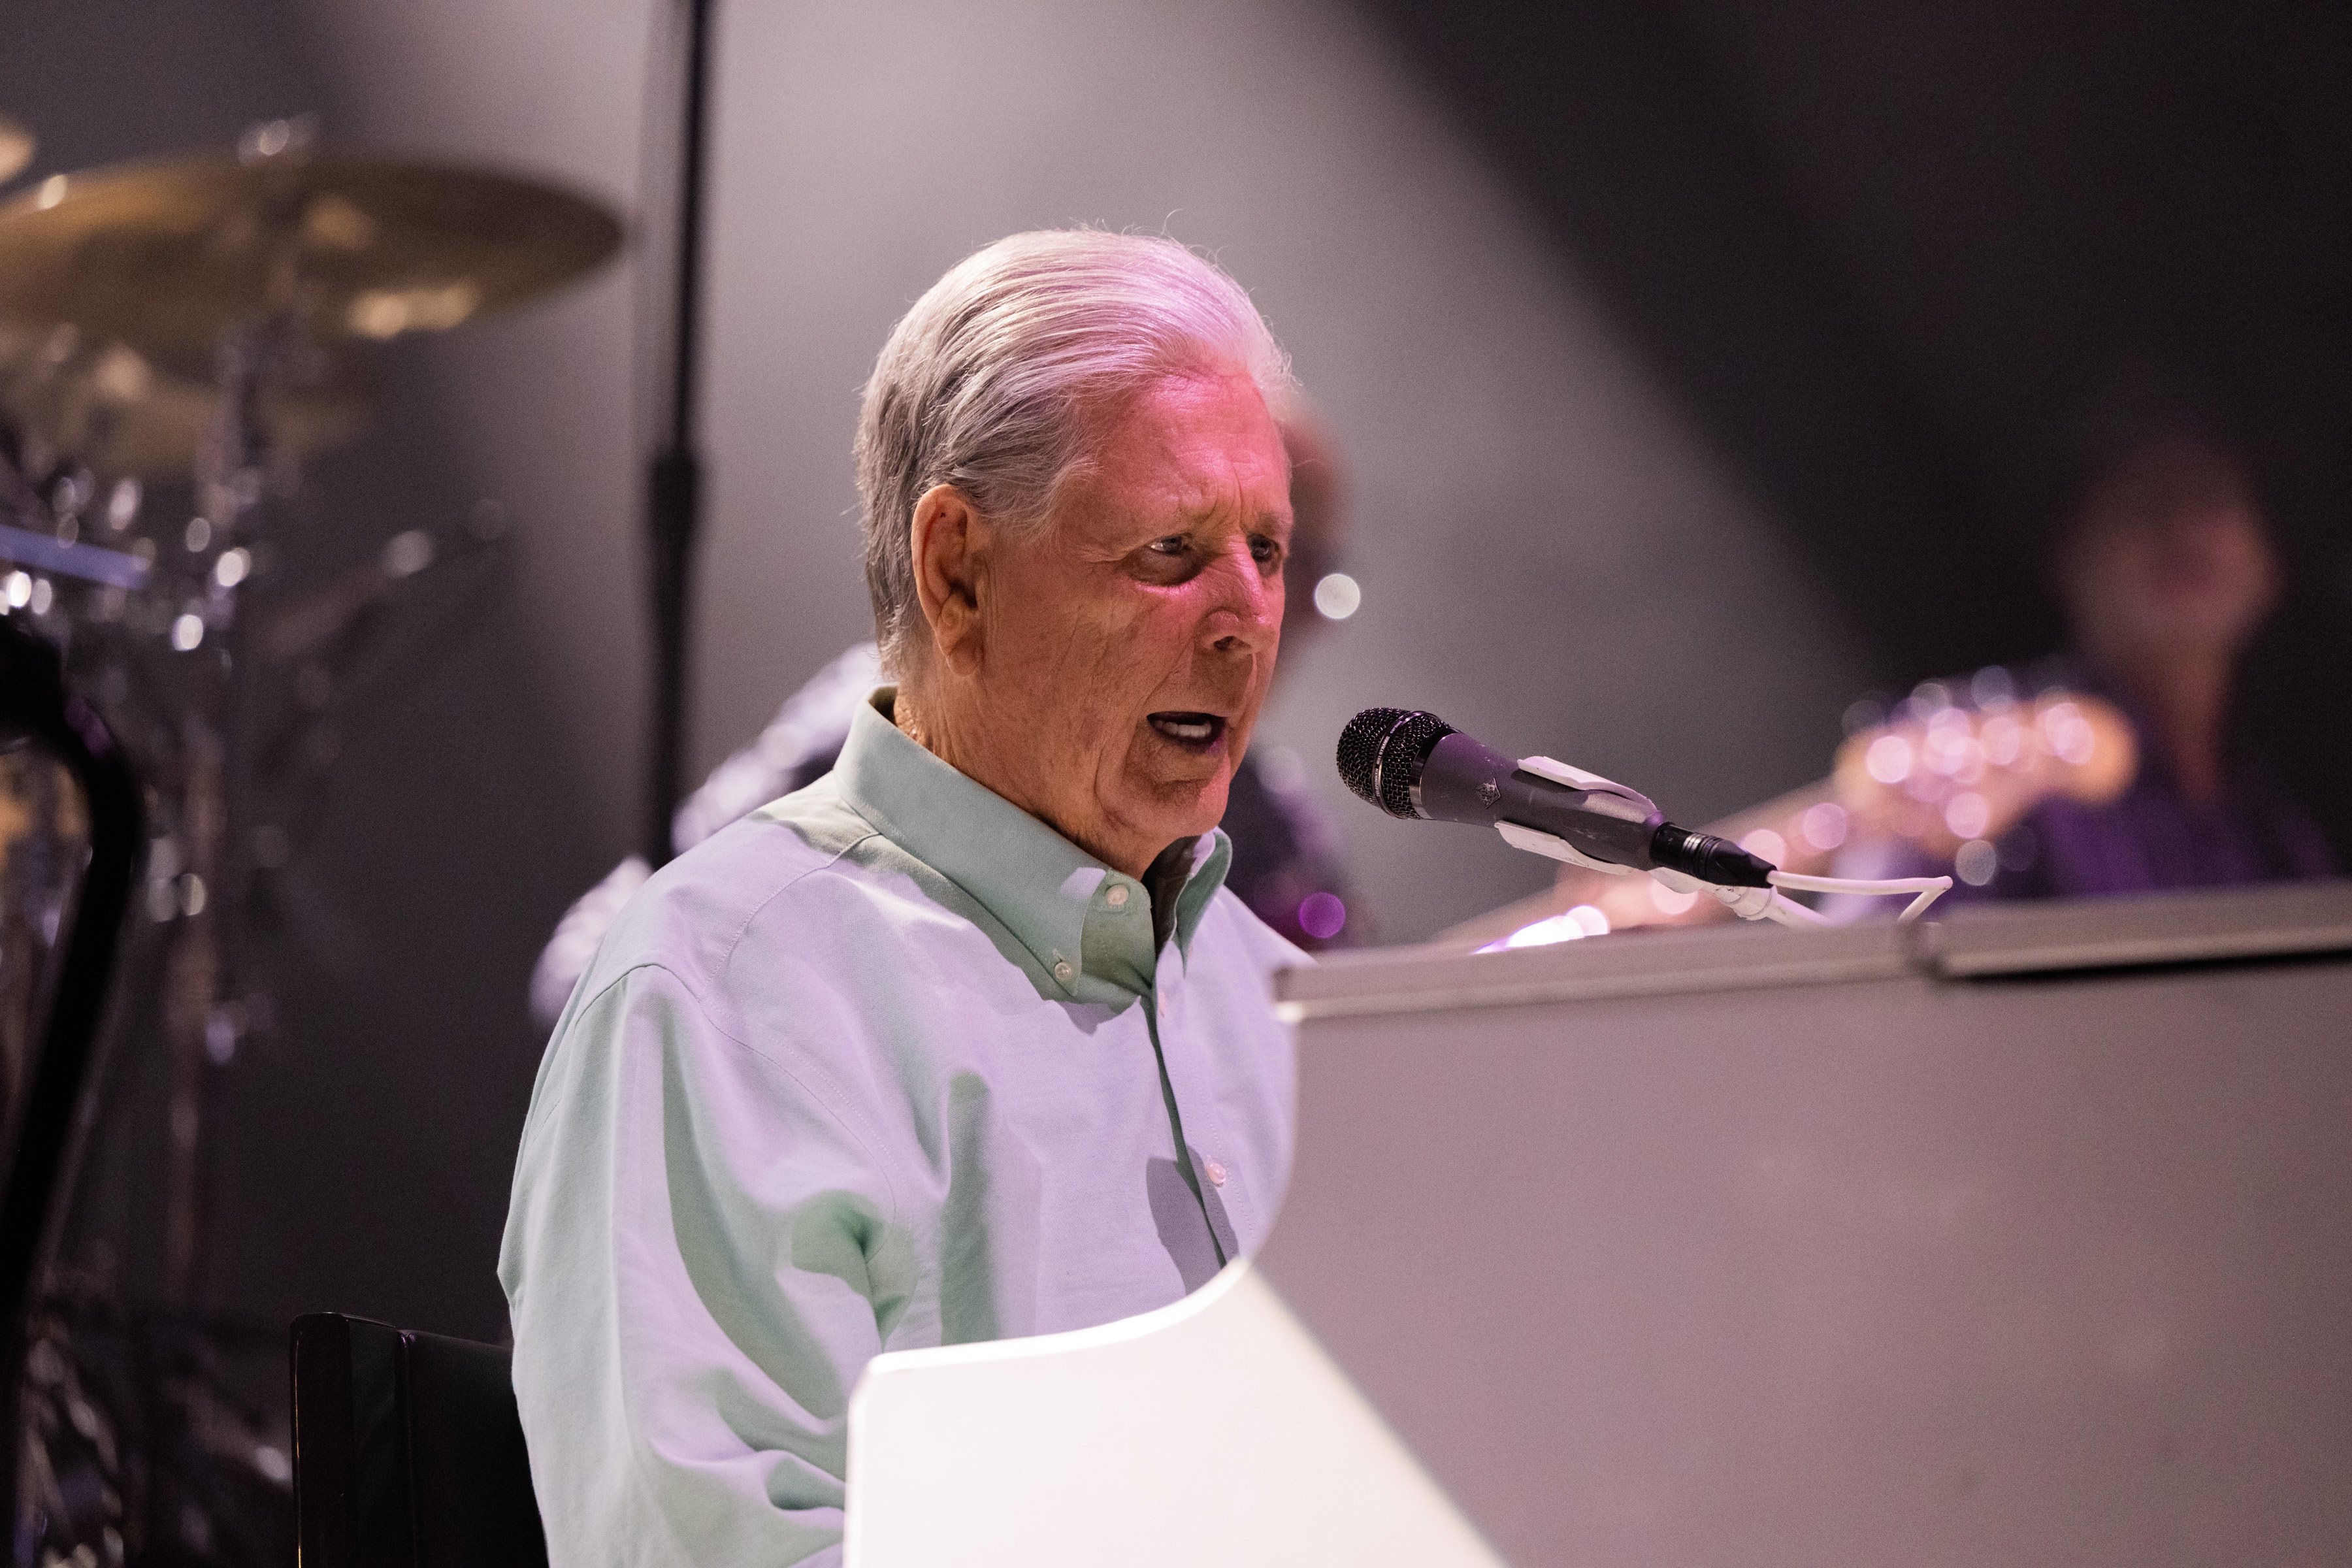 Musician Brian Wilson, founding member of The Beach Boys, performs onstage at The Kia Forum